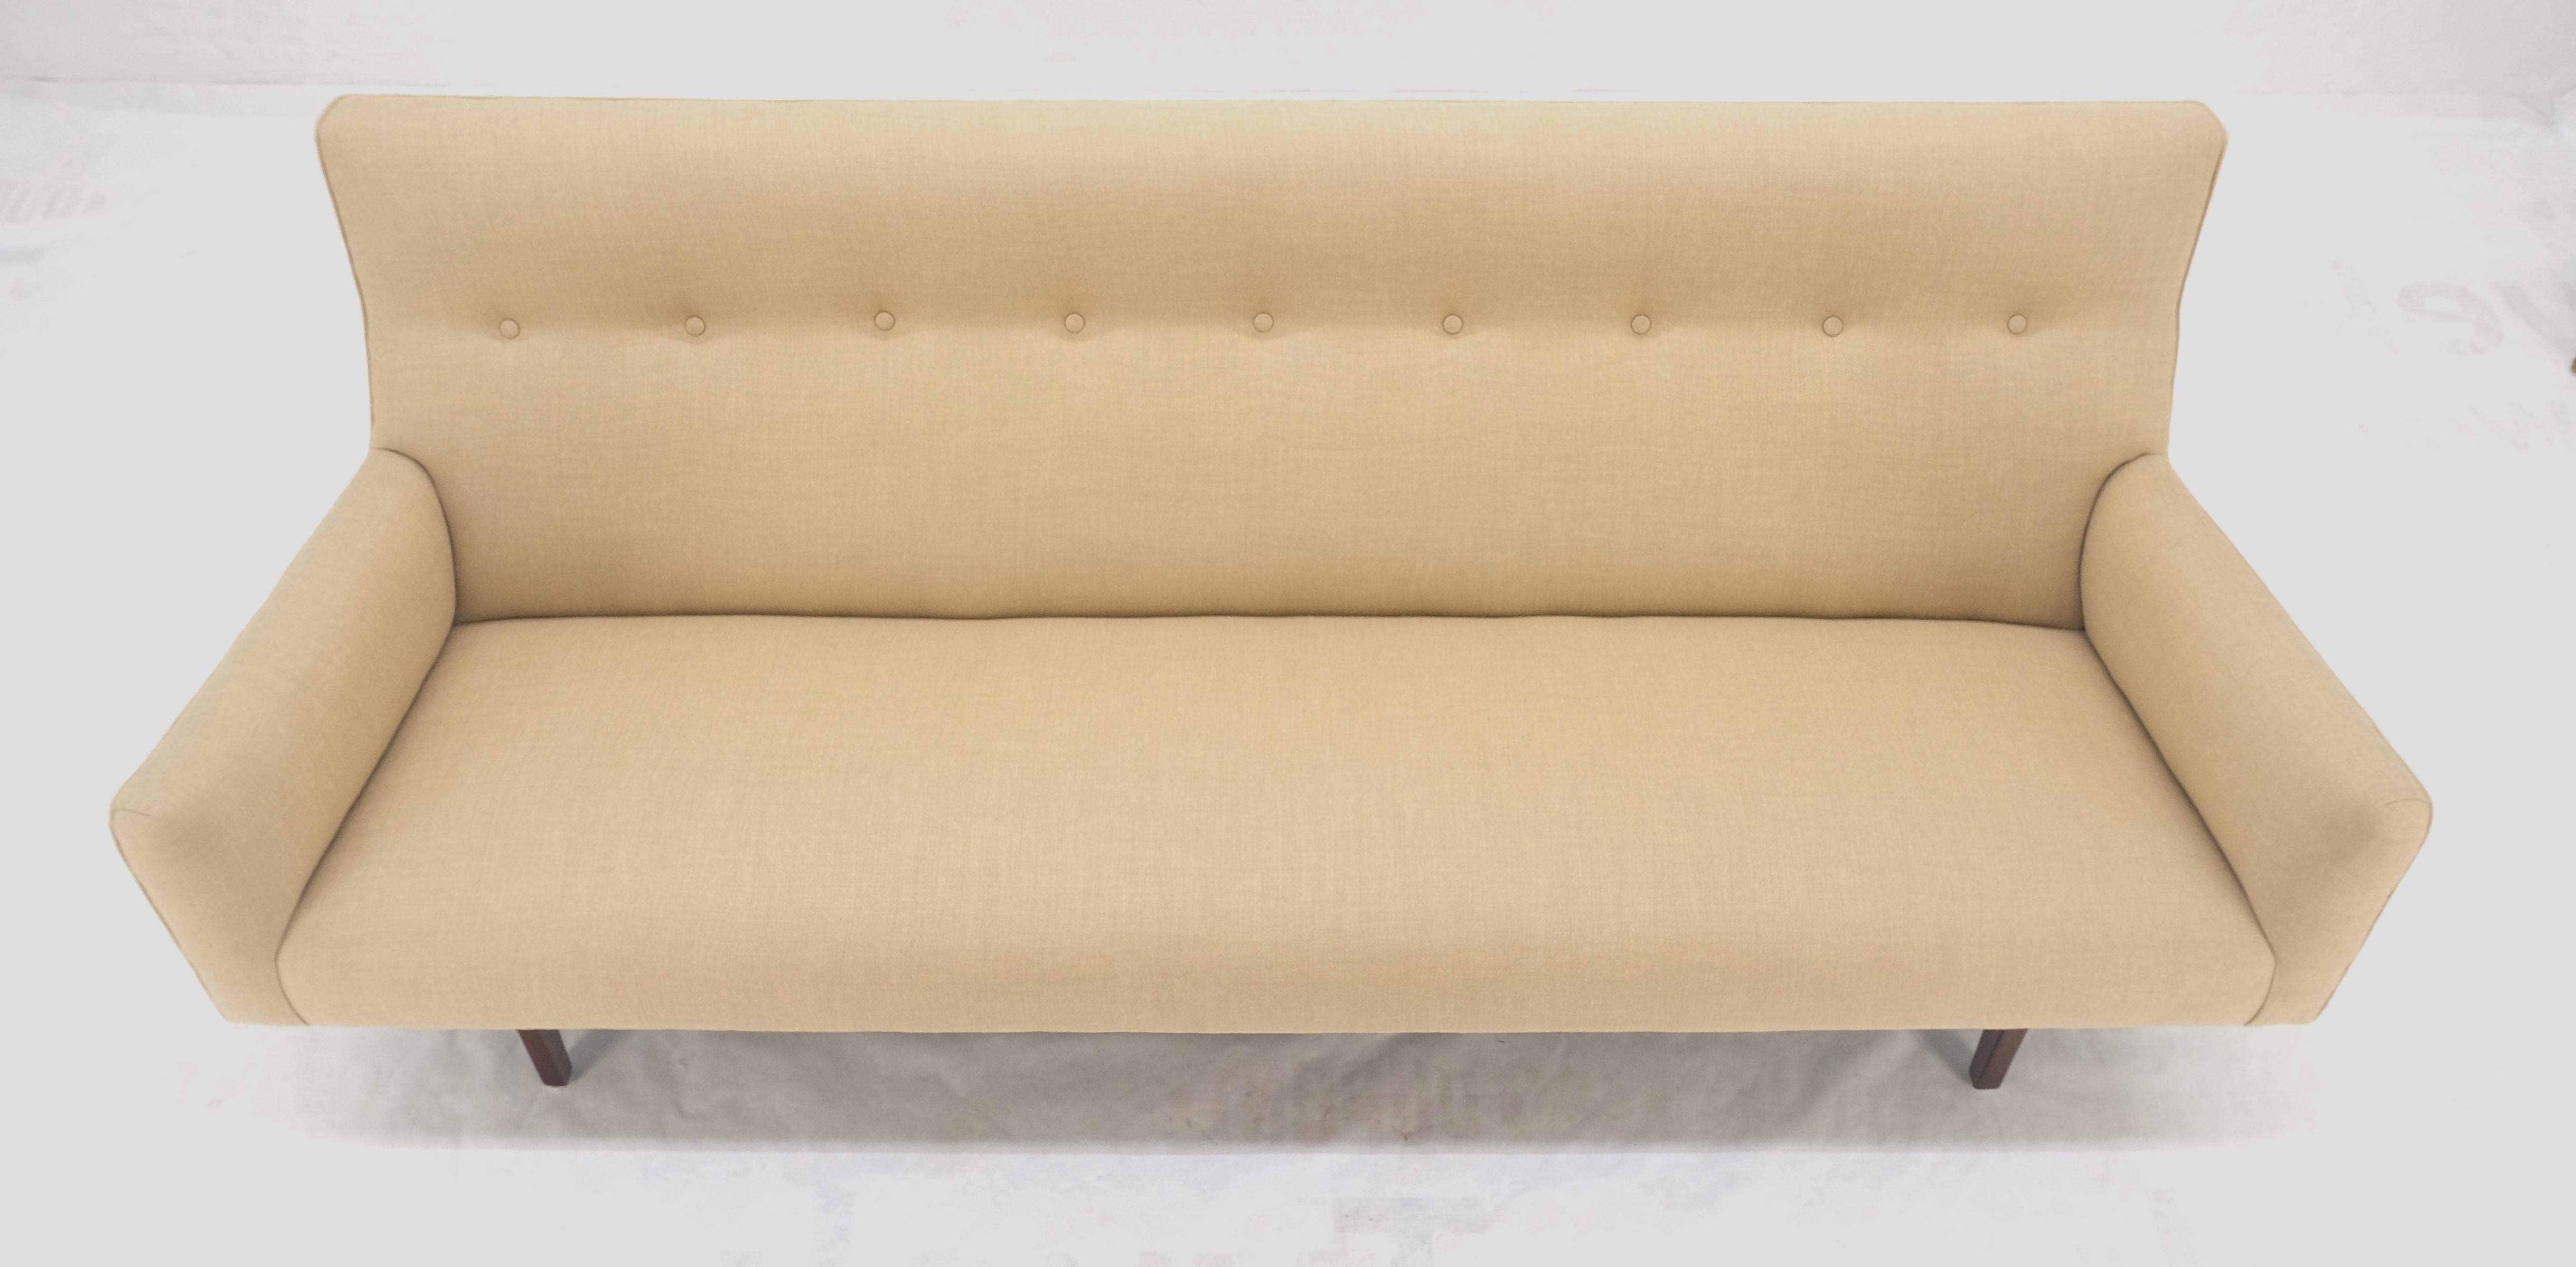 Jens Risom NEW Beige Linen Upholstery Oiled Walnut Frame c1960s Sofa Couch MINT! For Sale 3